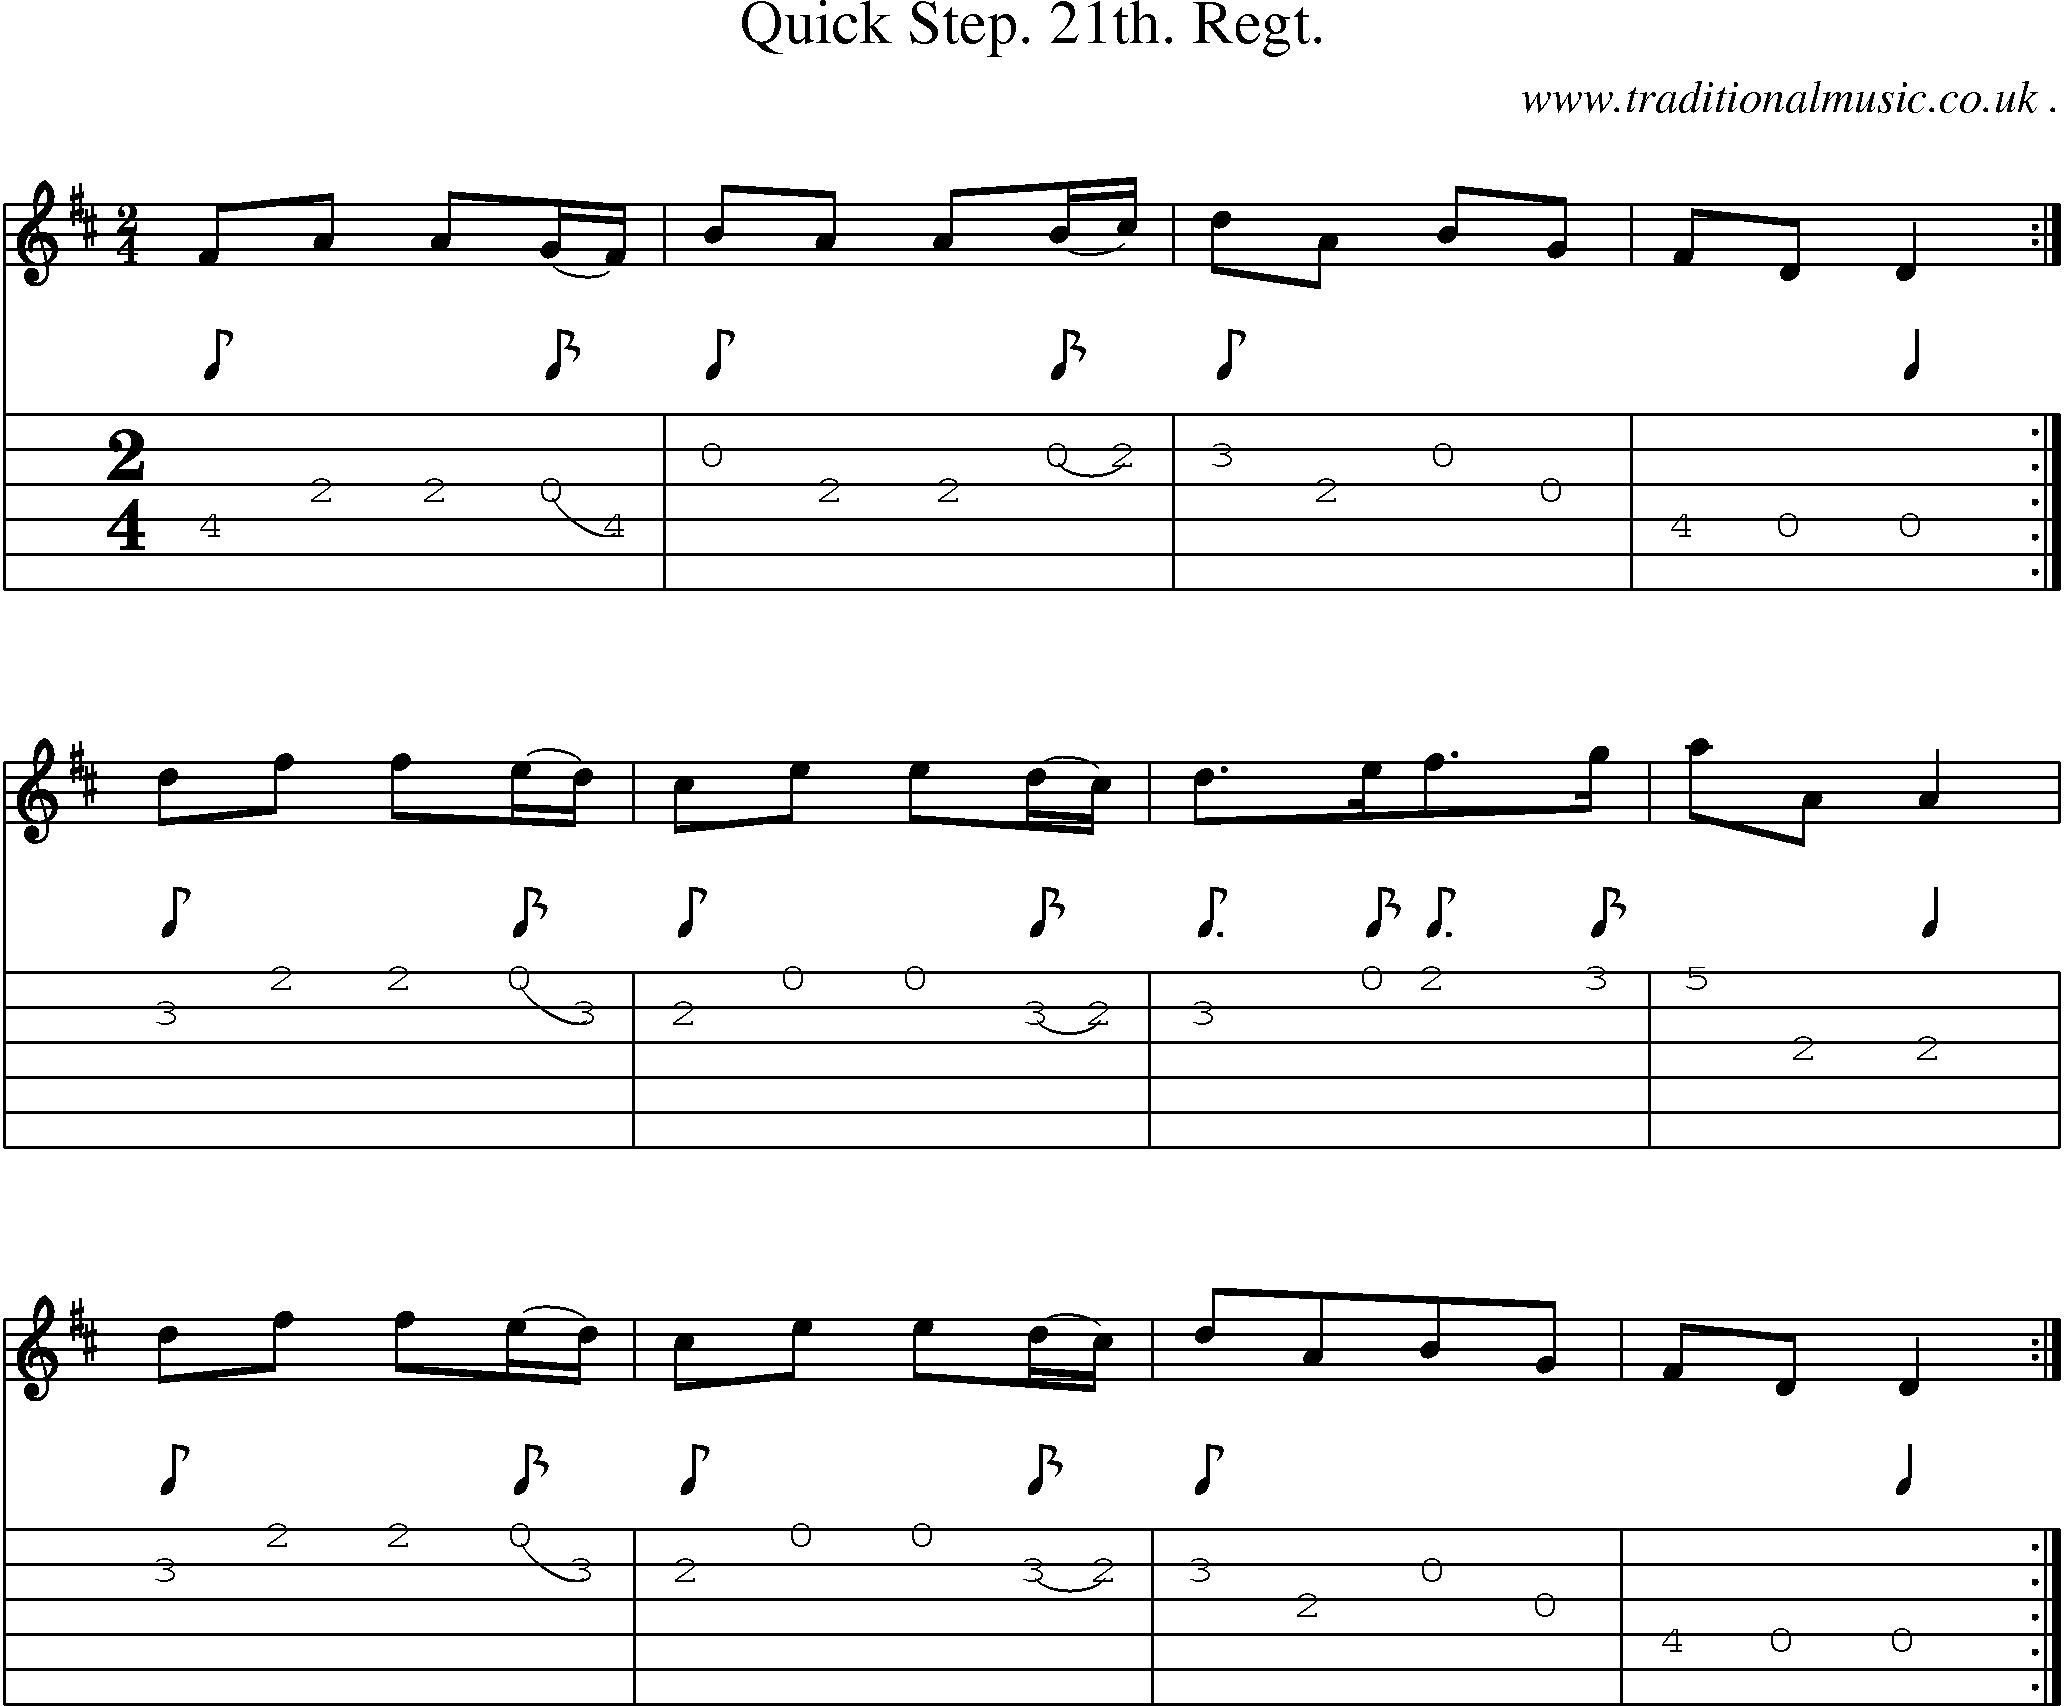 Sheet-Music and Guitar Tabs for Quick Step 21th Regt